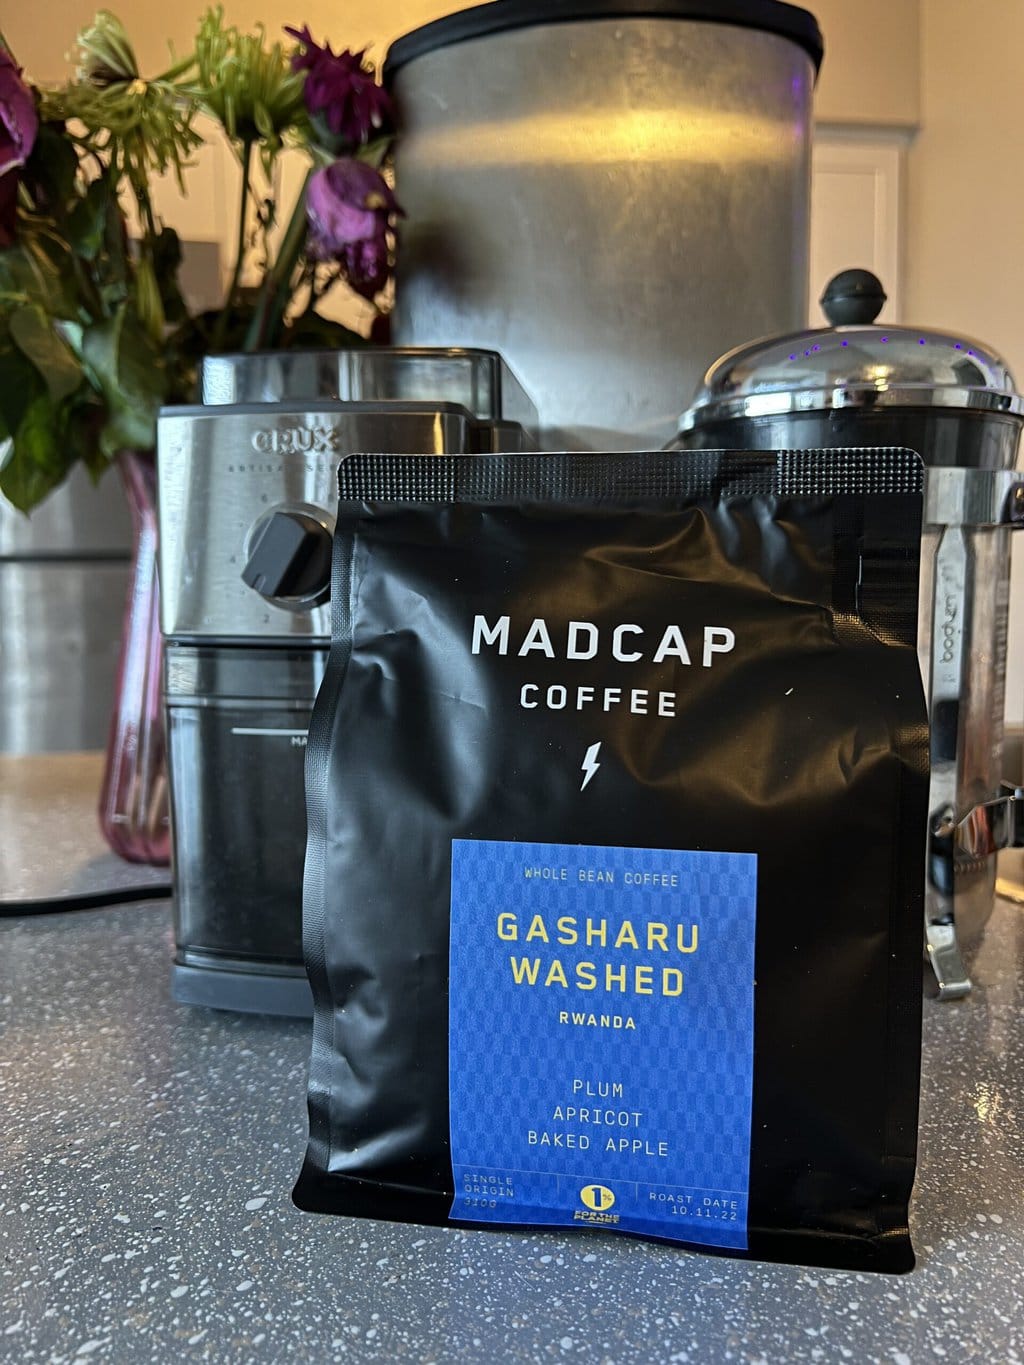 Gasharu Washed - Madcap Coffee pack next to the coffee grinder and french press